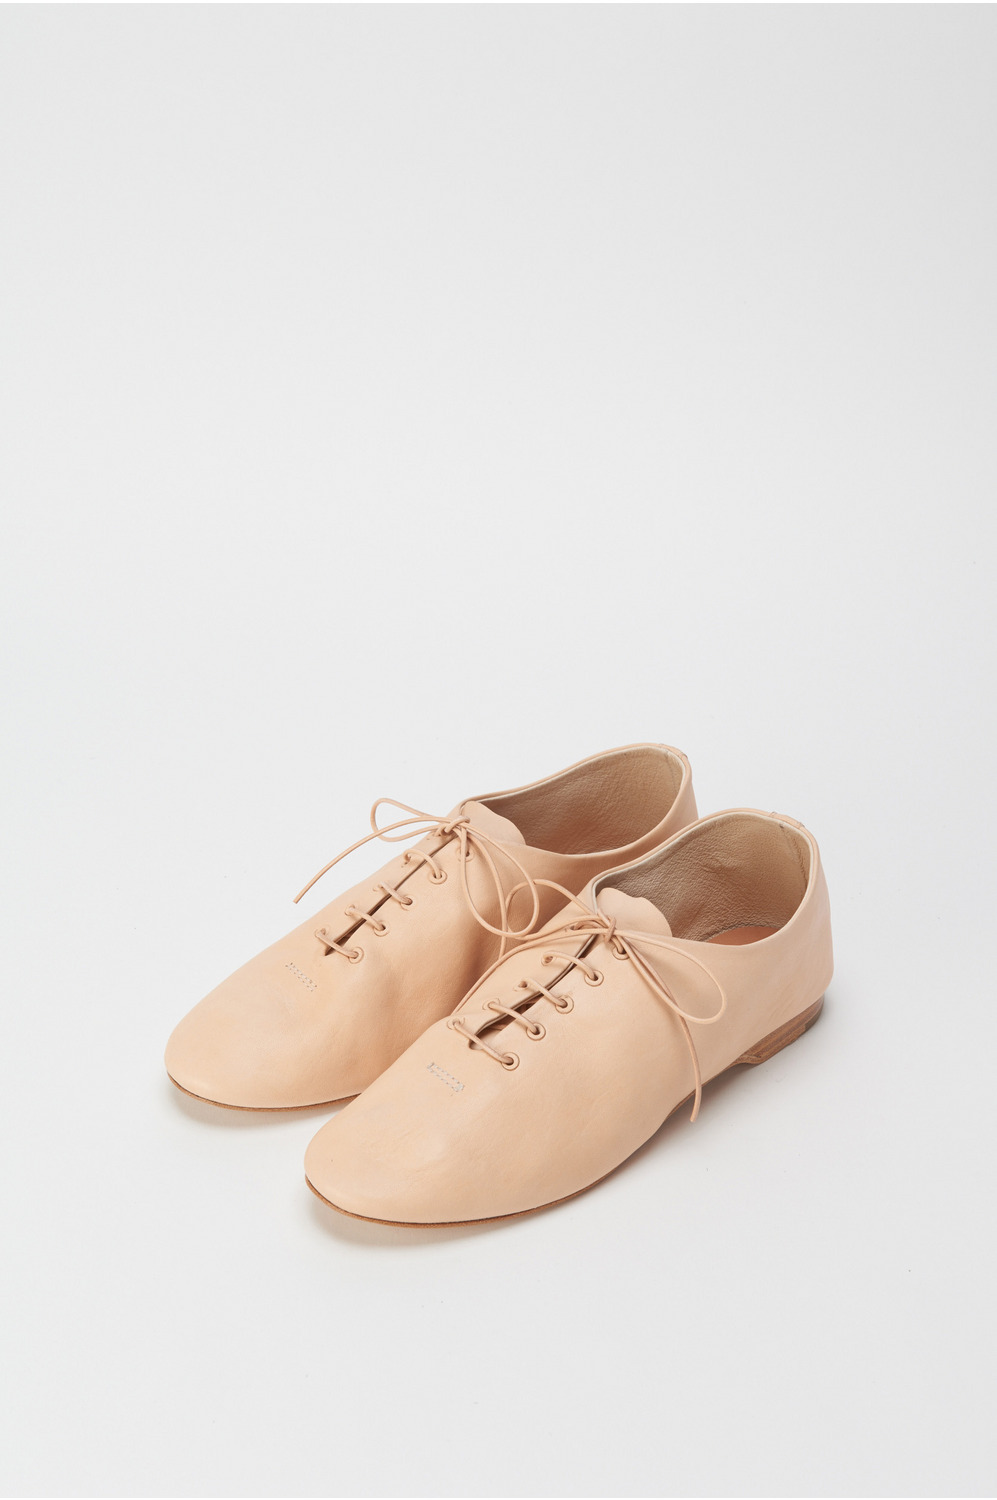 manual industrial products 13｜スキマ Hender Scheme Official Online Shop